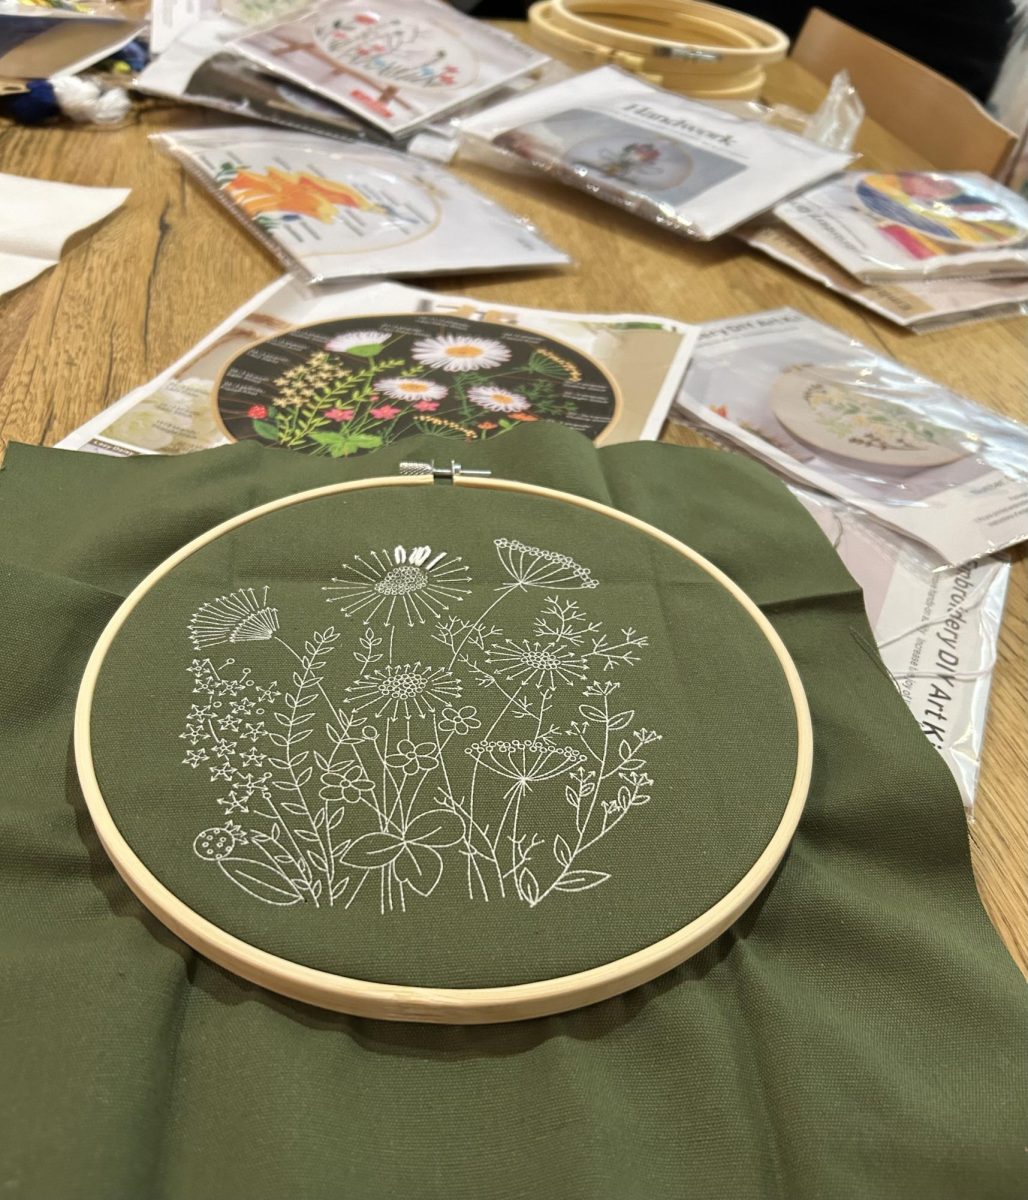 An embroidery project in progress on a table at W&B